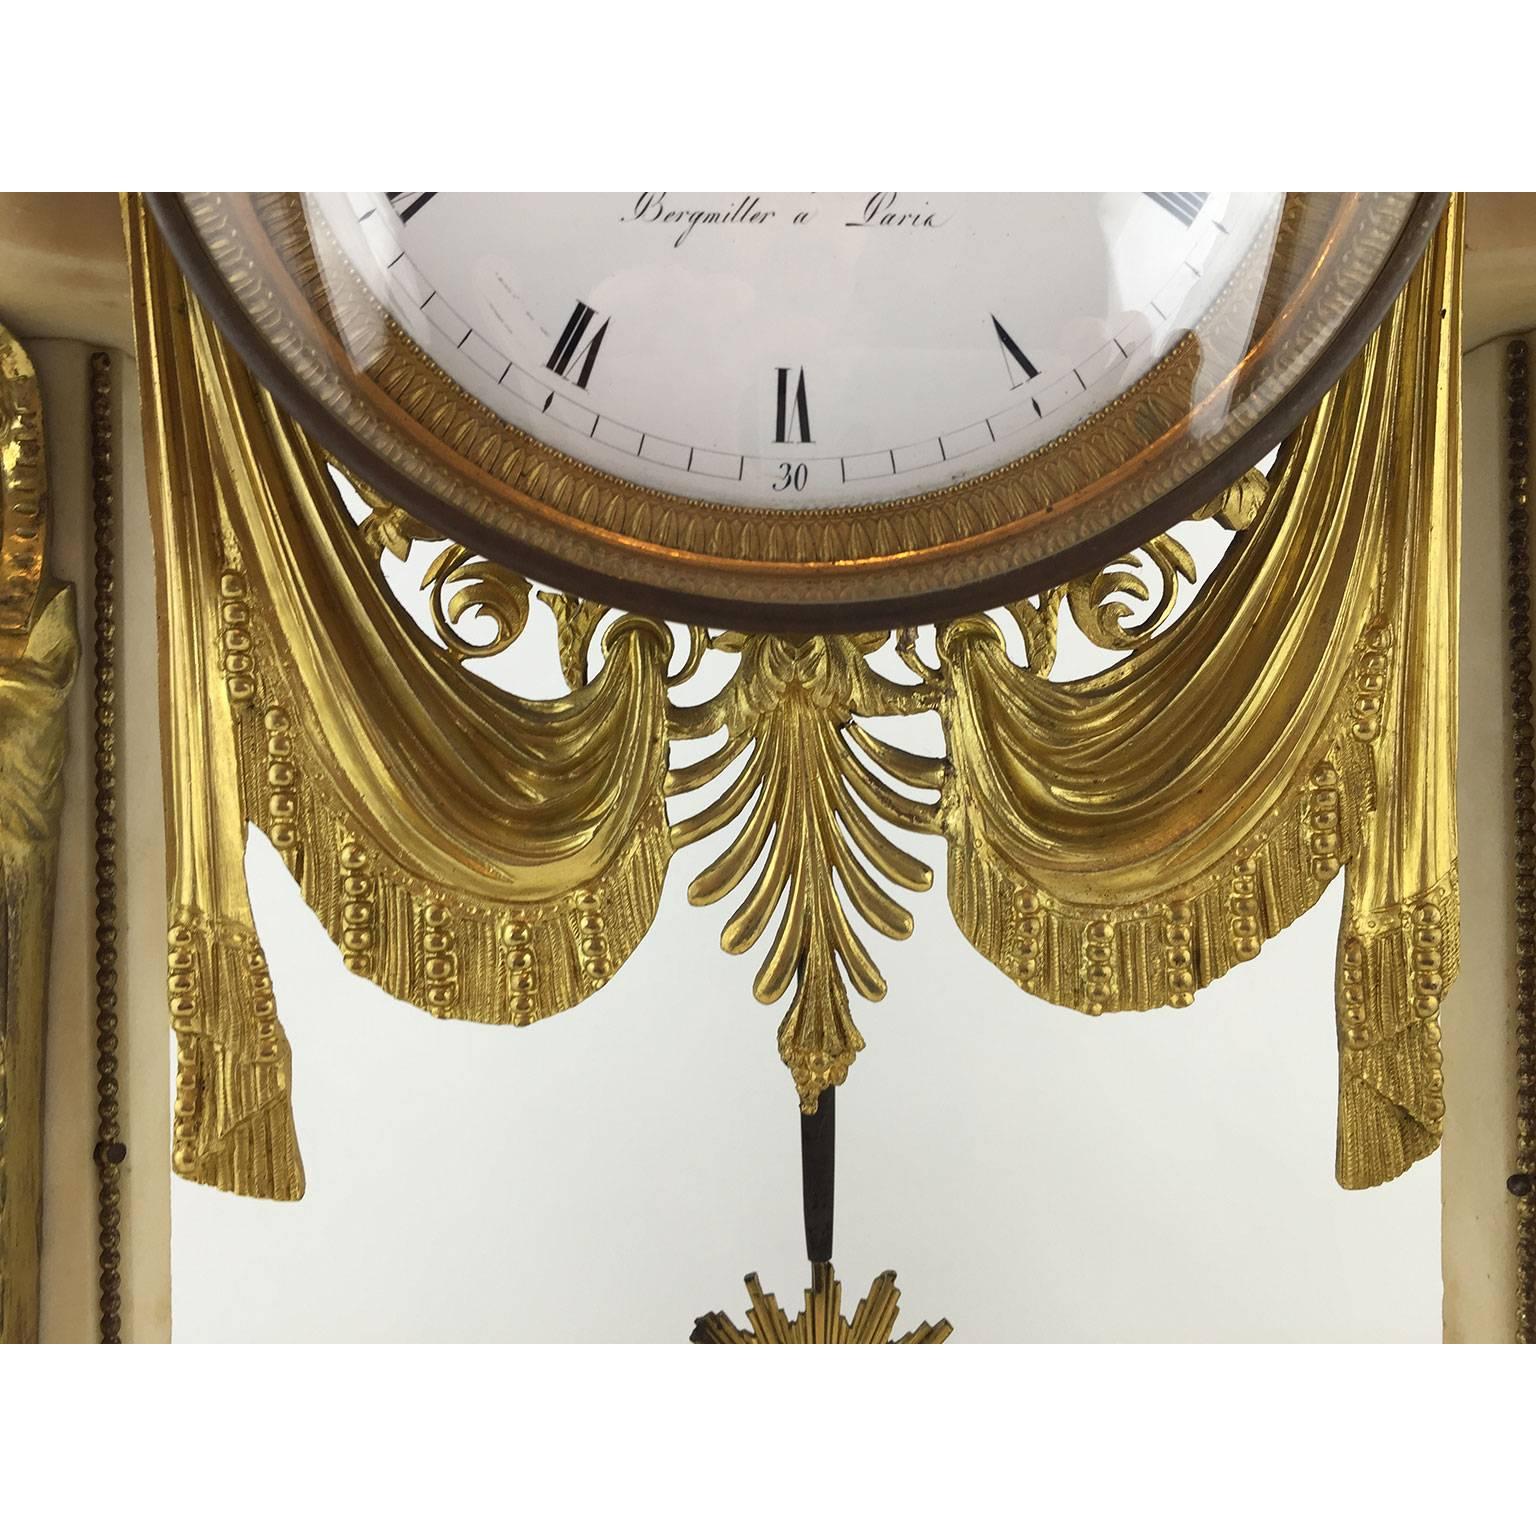 A superb Louis XVI ormolu-mounted and white Carrara marble temple mantel clock, white enamelled dial marked Bergmiller a Paris, watchmaker active in Paris, atelier in rue du Petit-Lion Sanit-Sauveur from 1810 up to 1830, follower of Rouviere, Louis